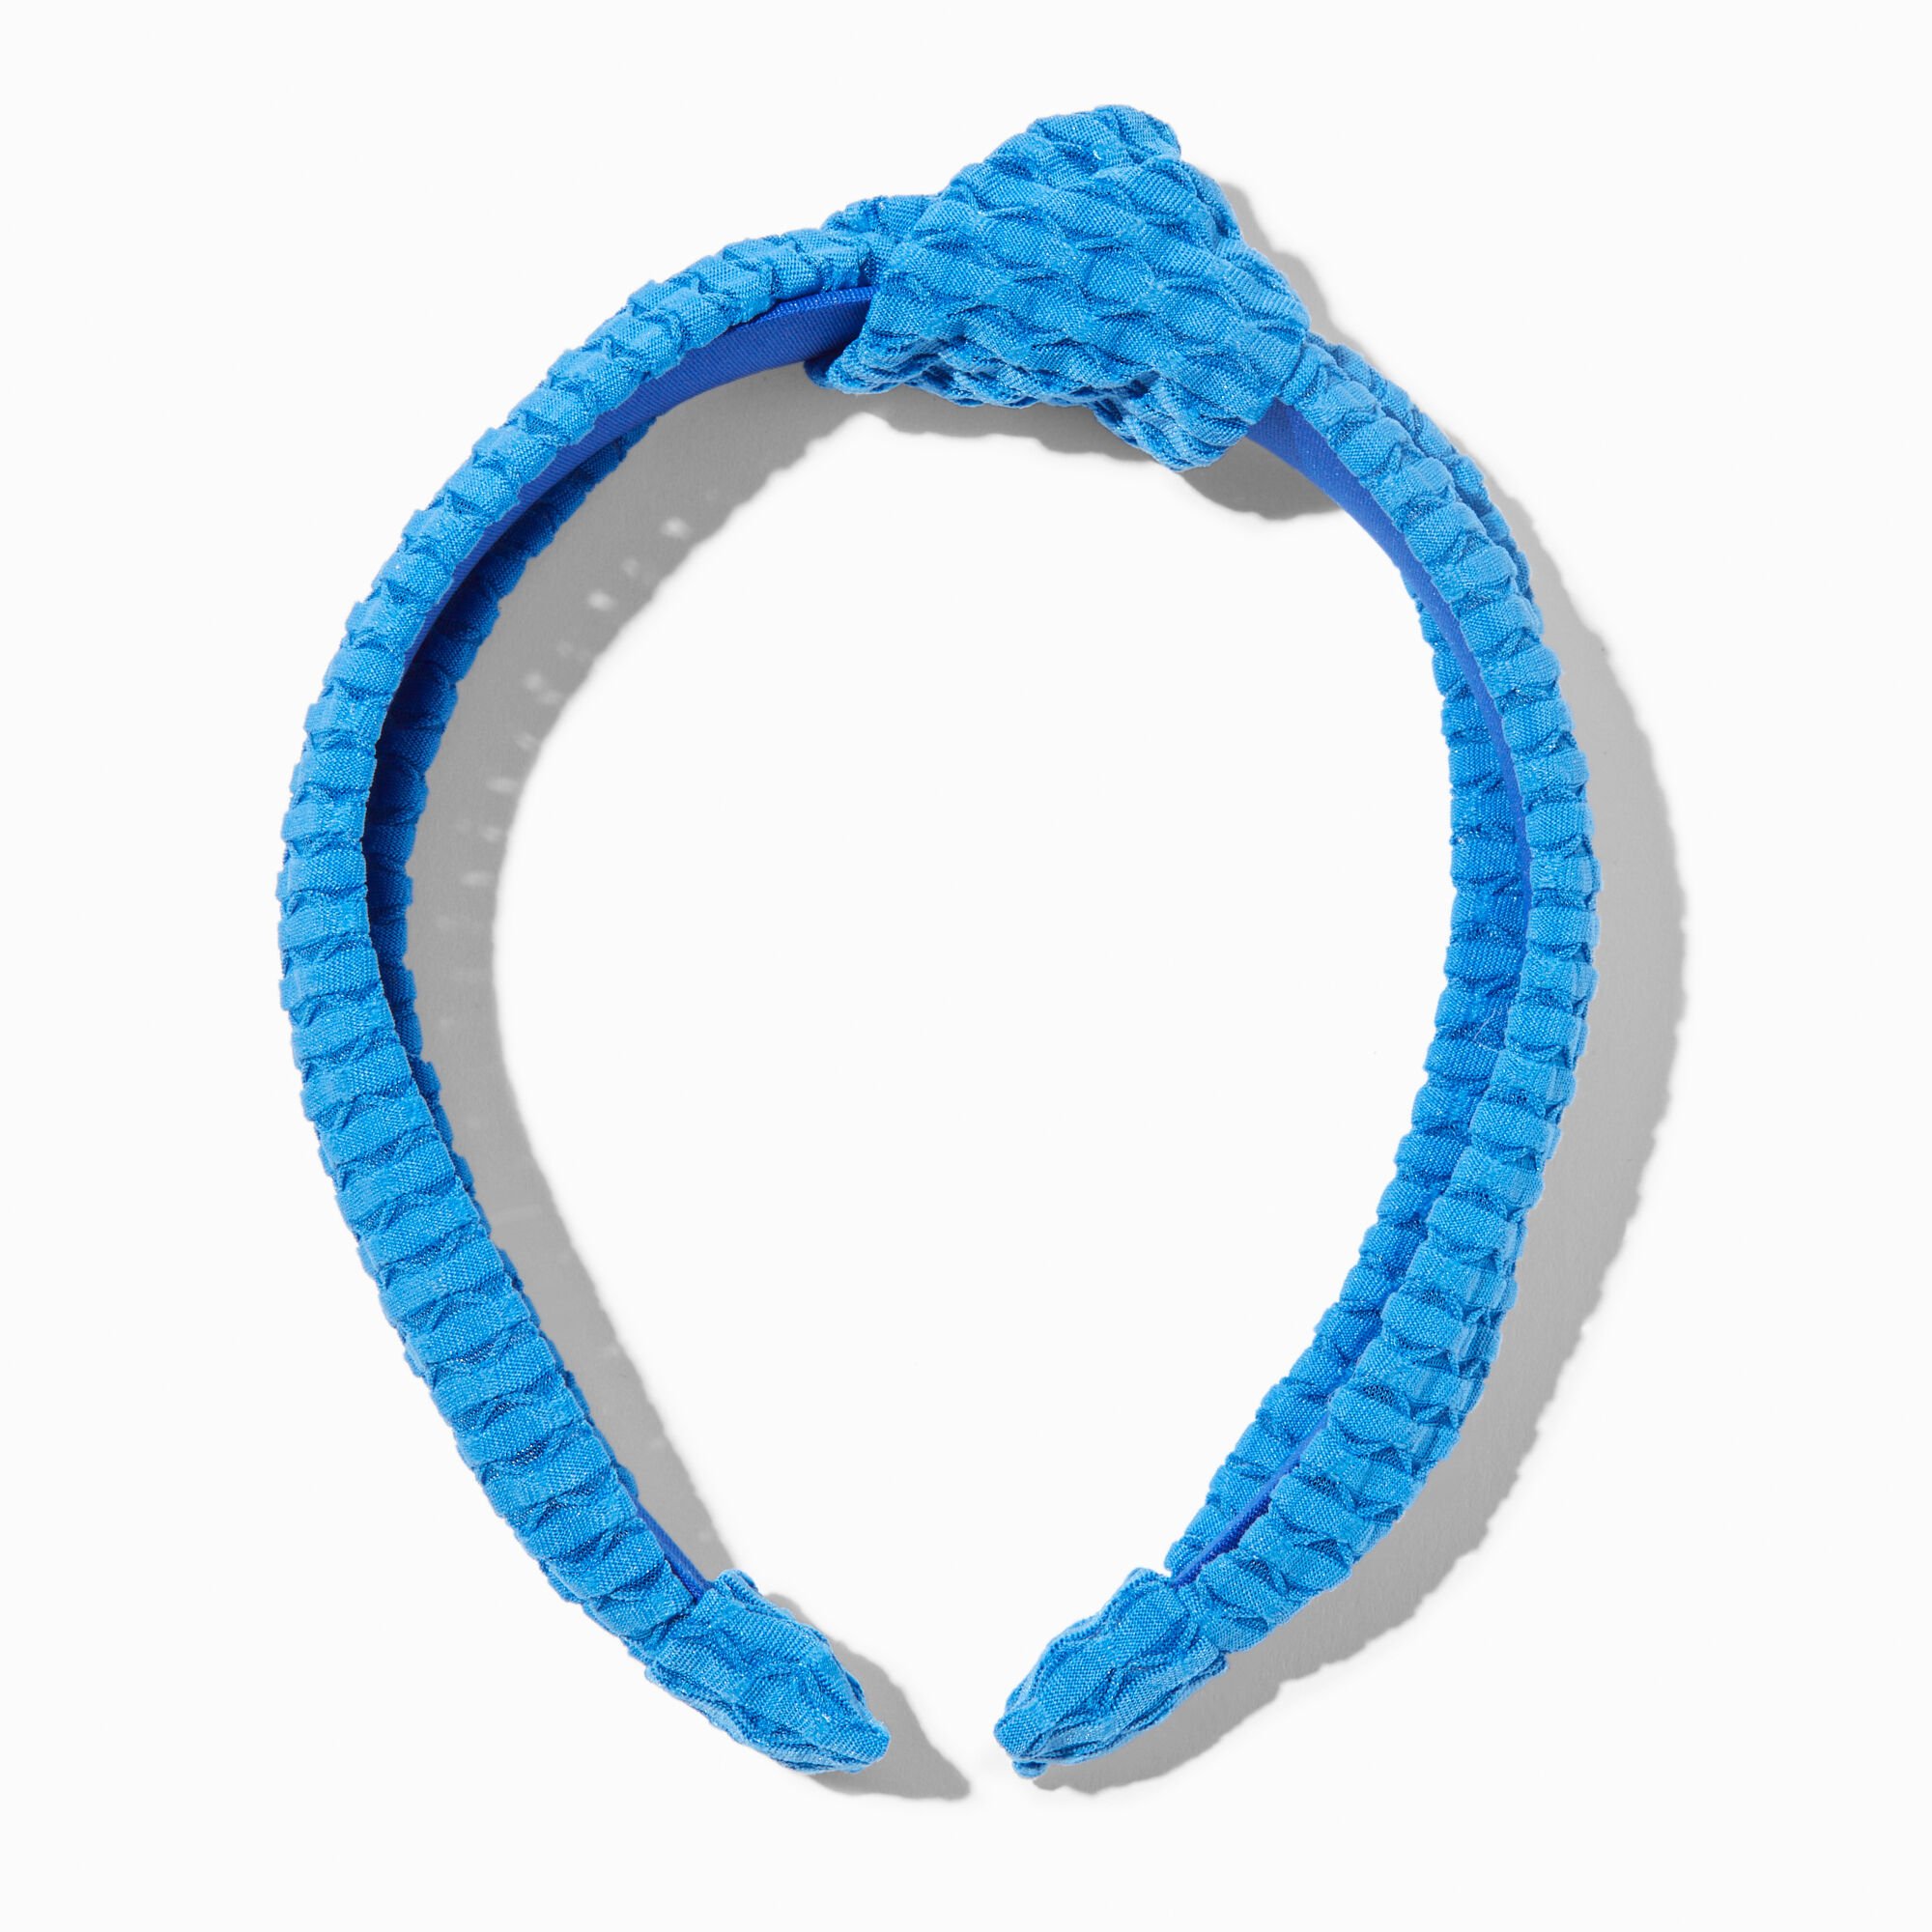 View Claires WaffleWeave Knotted Headband Cobalt Blue information